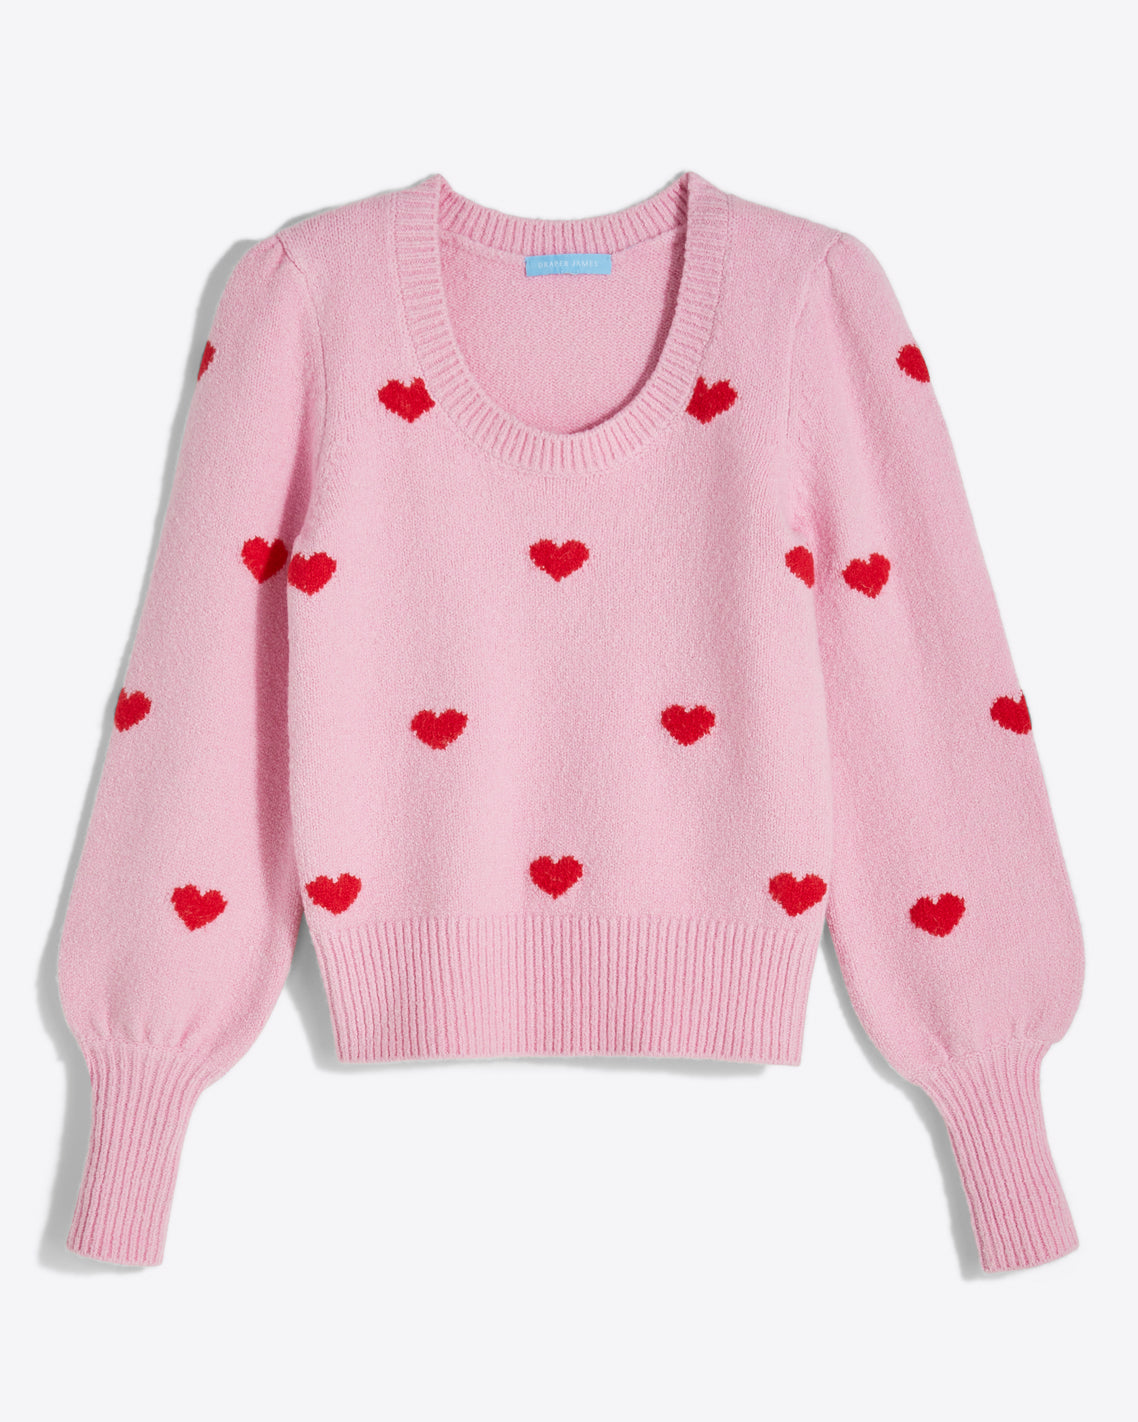 Puff Sleeve Sweater in Pink Hearts